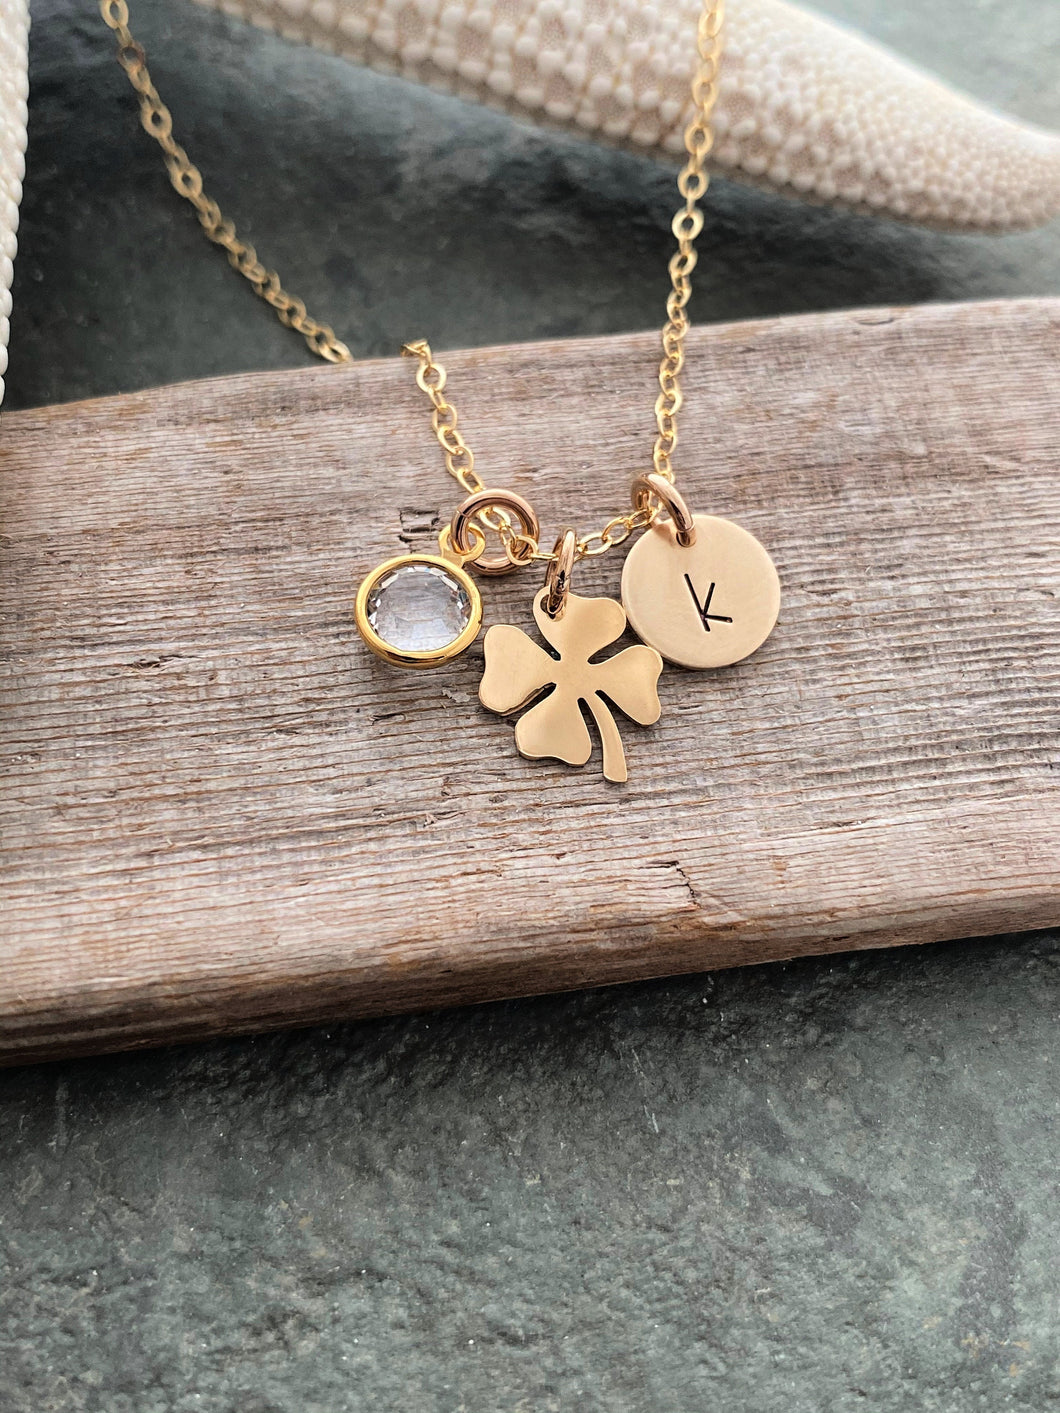 Sterling silver or bronze Four leaf clover charm necklace, Personalized initial disc, Swarovski crystal birthstone - Birthday gift for her